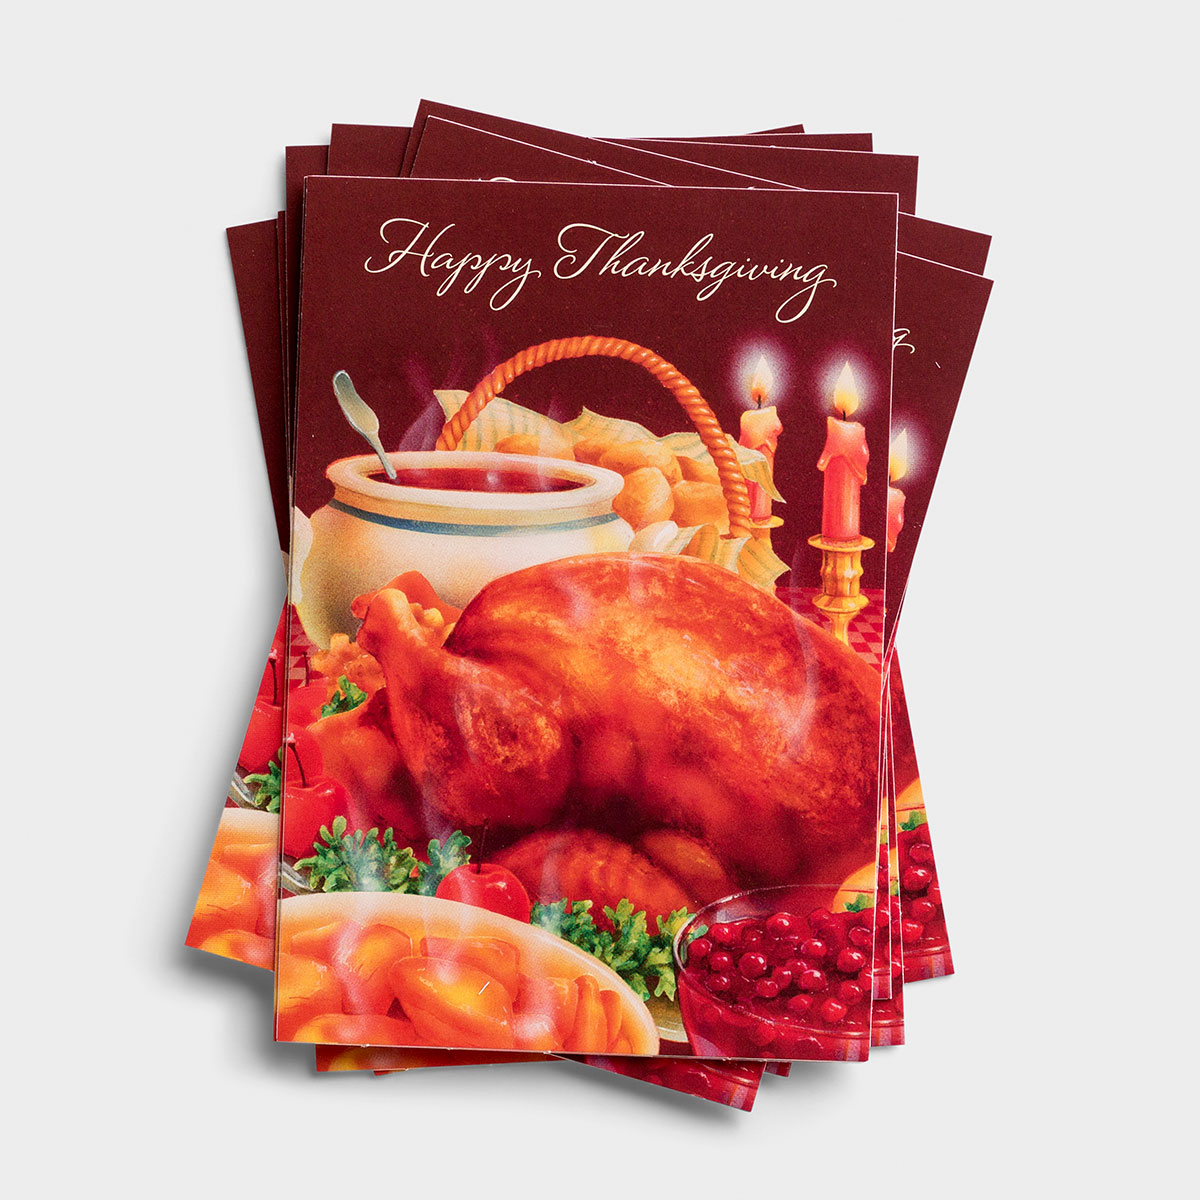 The Thanksgiving dinner on the cover and an inspiring message inside make these 'Happy Thanksgiving' inspirational note cards perfect for letting special people know you're thinking of them at Thanksgiving.